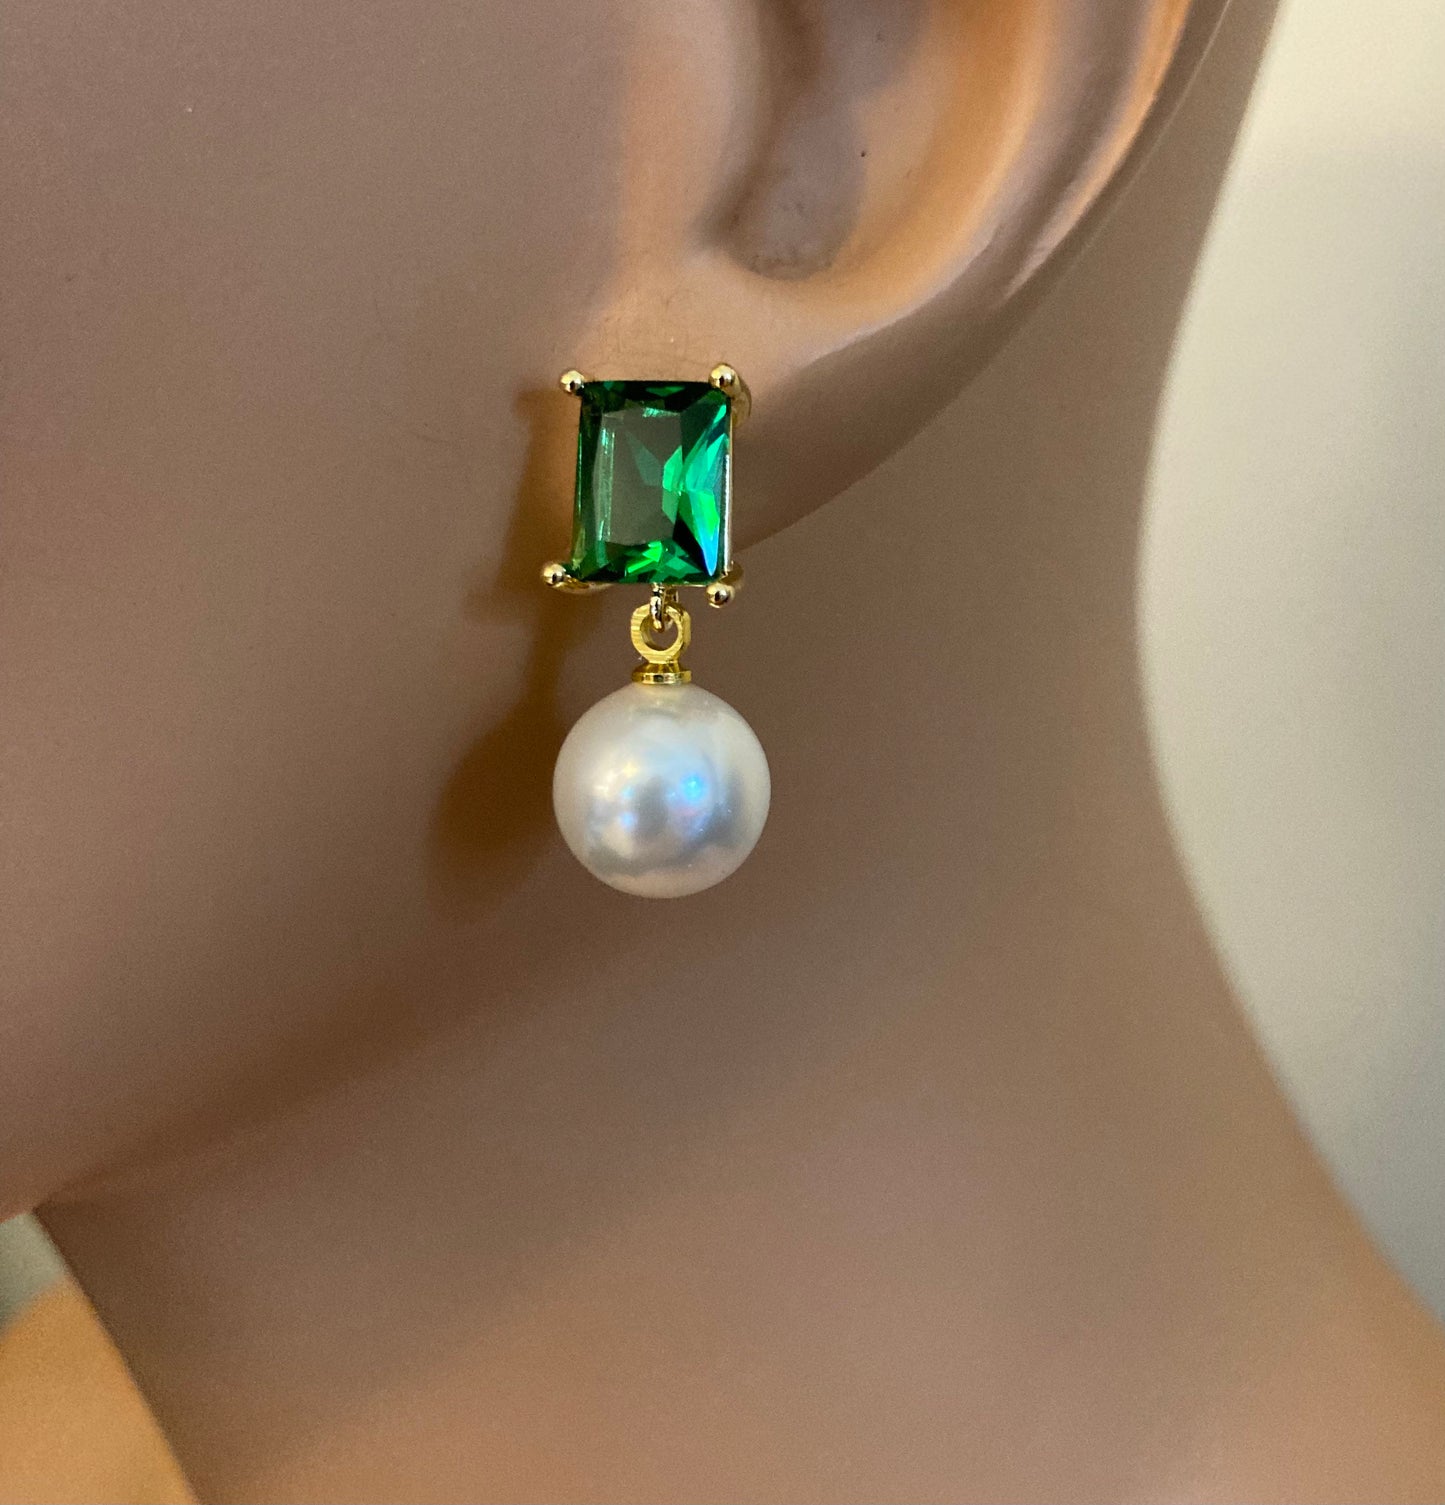 Pearl Earrings with Green Rhinestone White Pearl Earrings Gold or Silver post Emerald Green wedding earrings mother of the bride classic